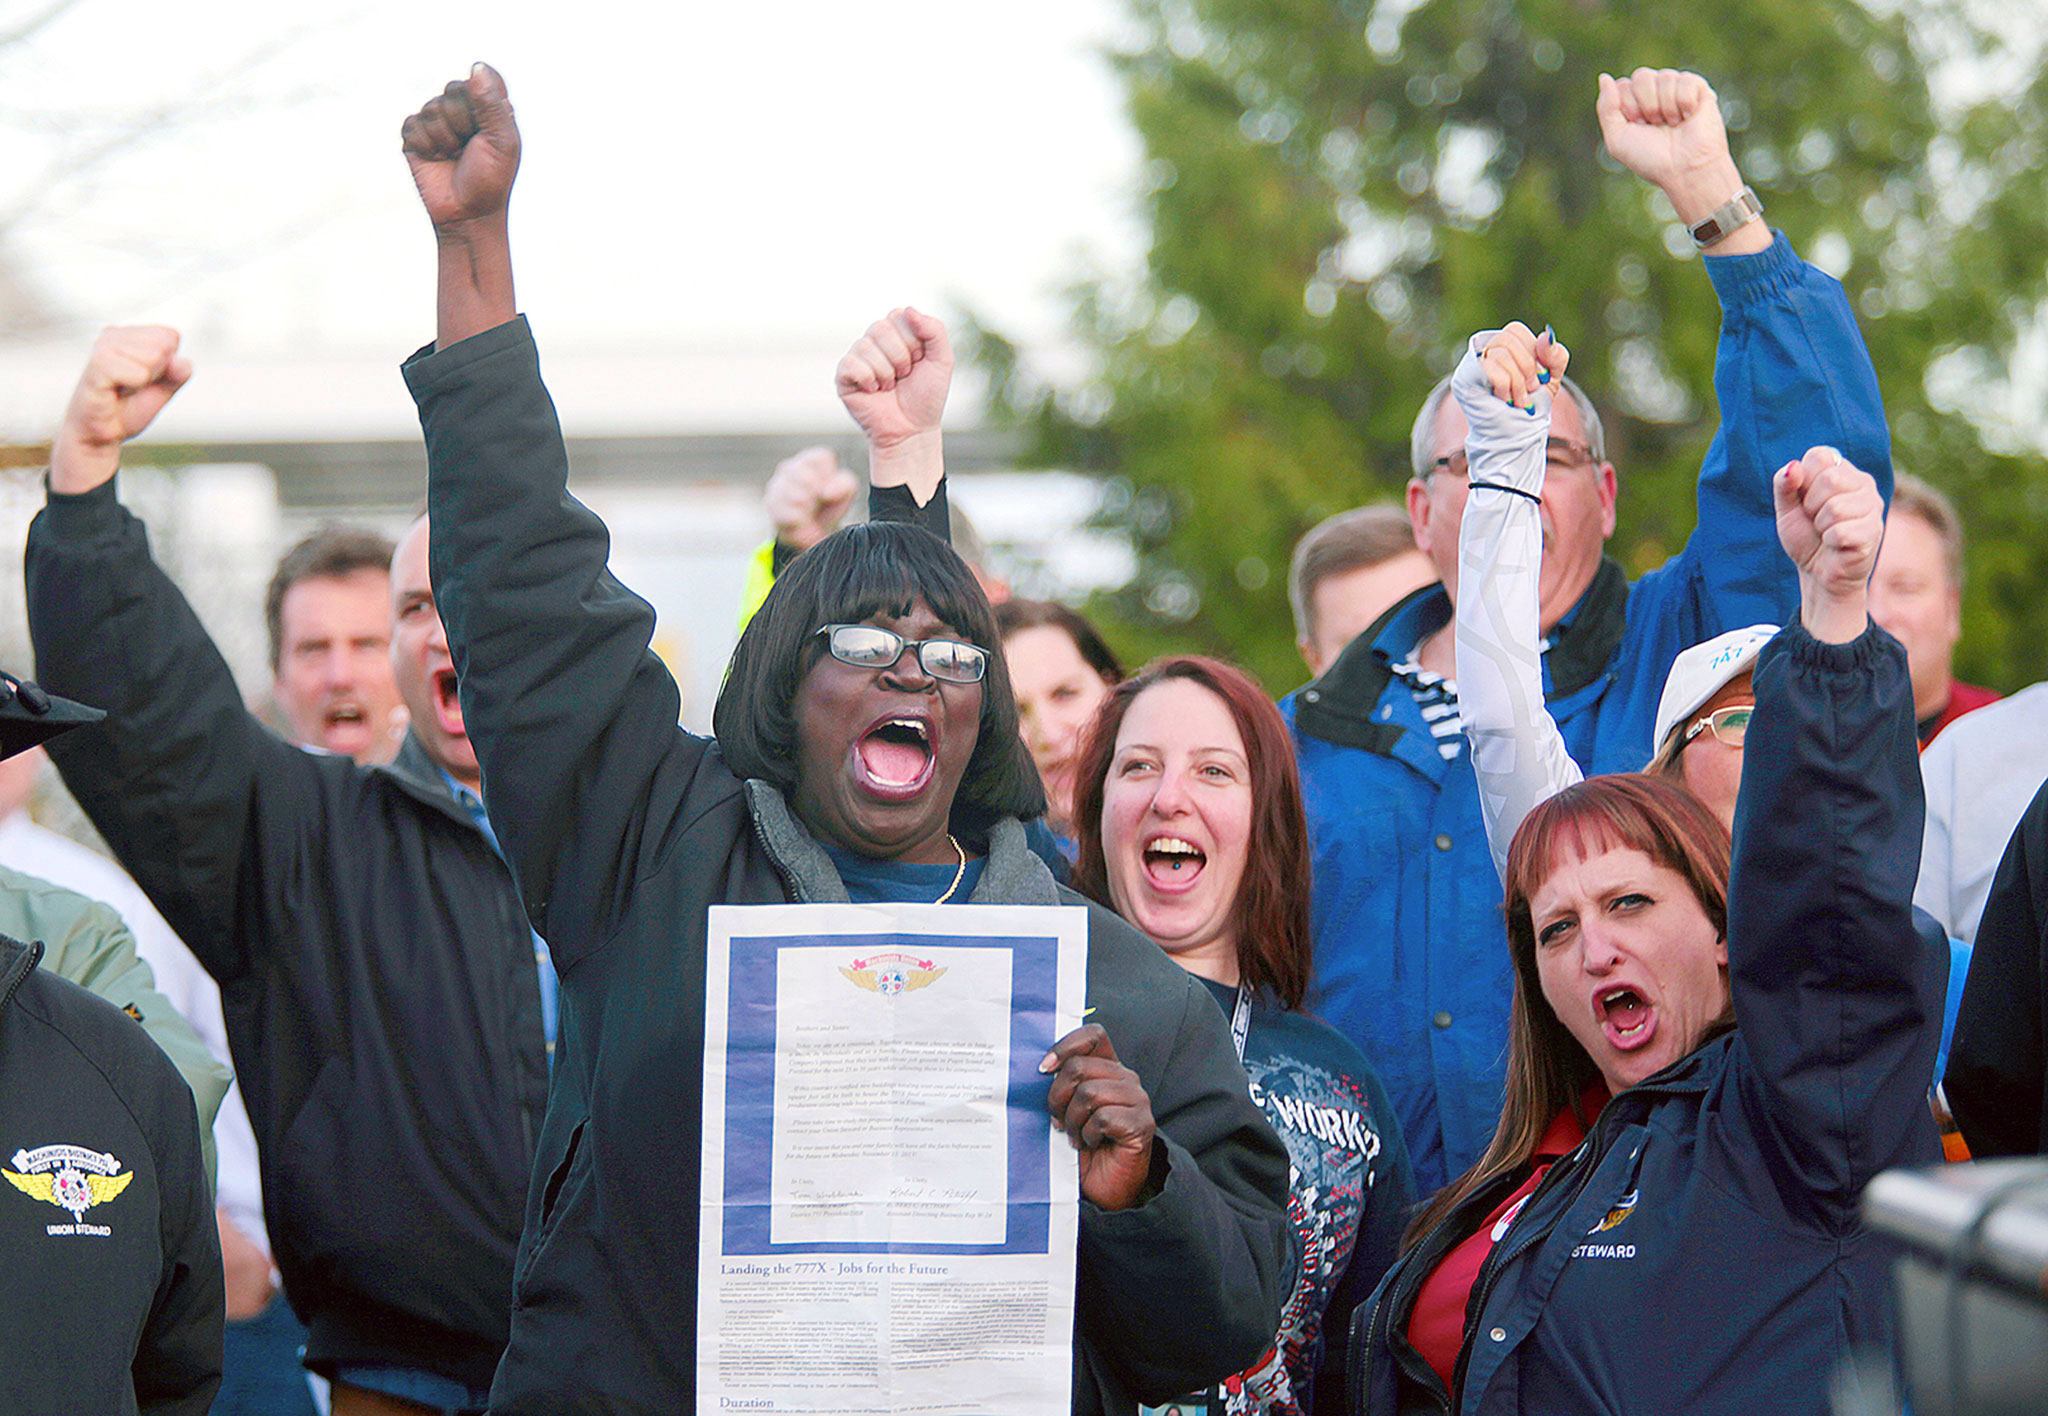 Machinist Stephanie Lloyd-Agnew holds up a contract while chanting “just say no,” with fellow machinists during a rally at the Everett Machinists Union Hall on November 11, 2013. (Mark Mulligan / The Herald)